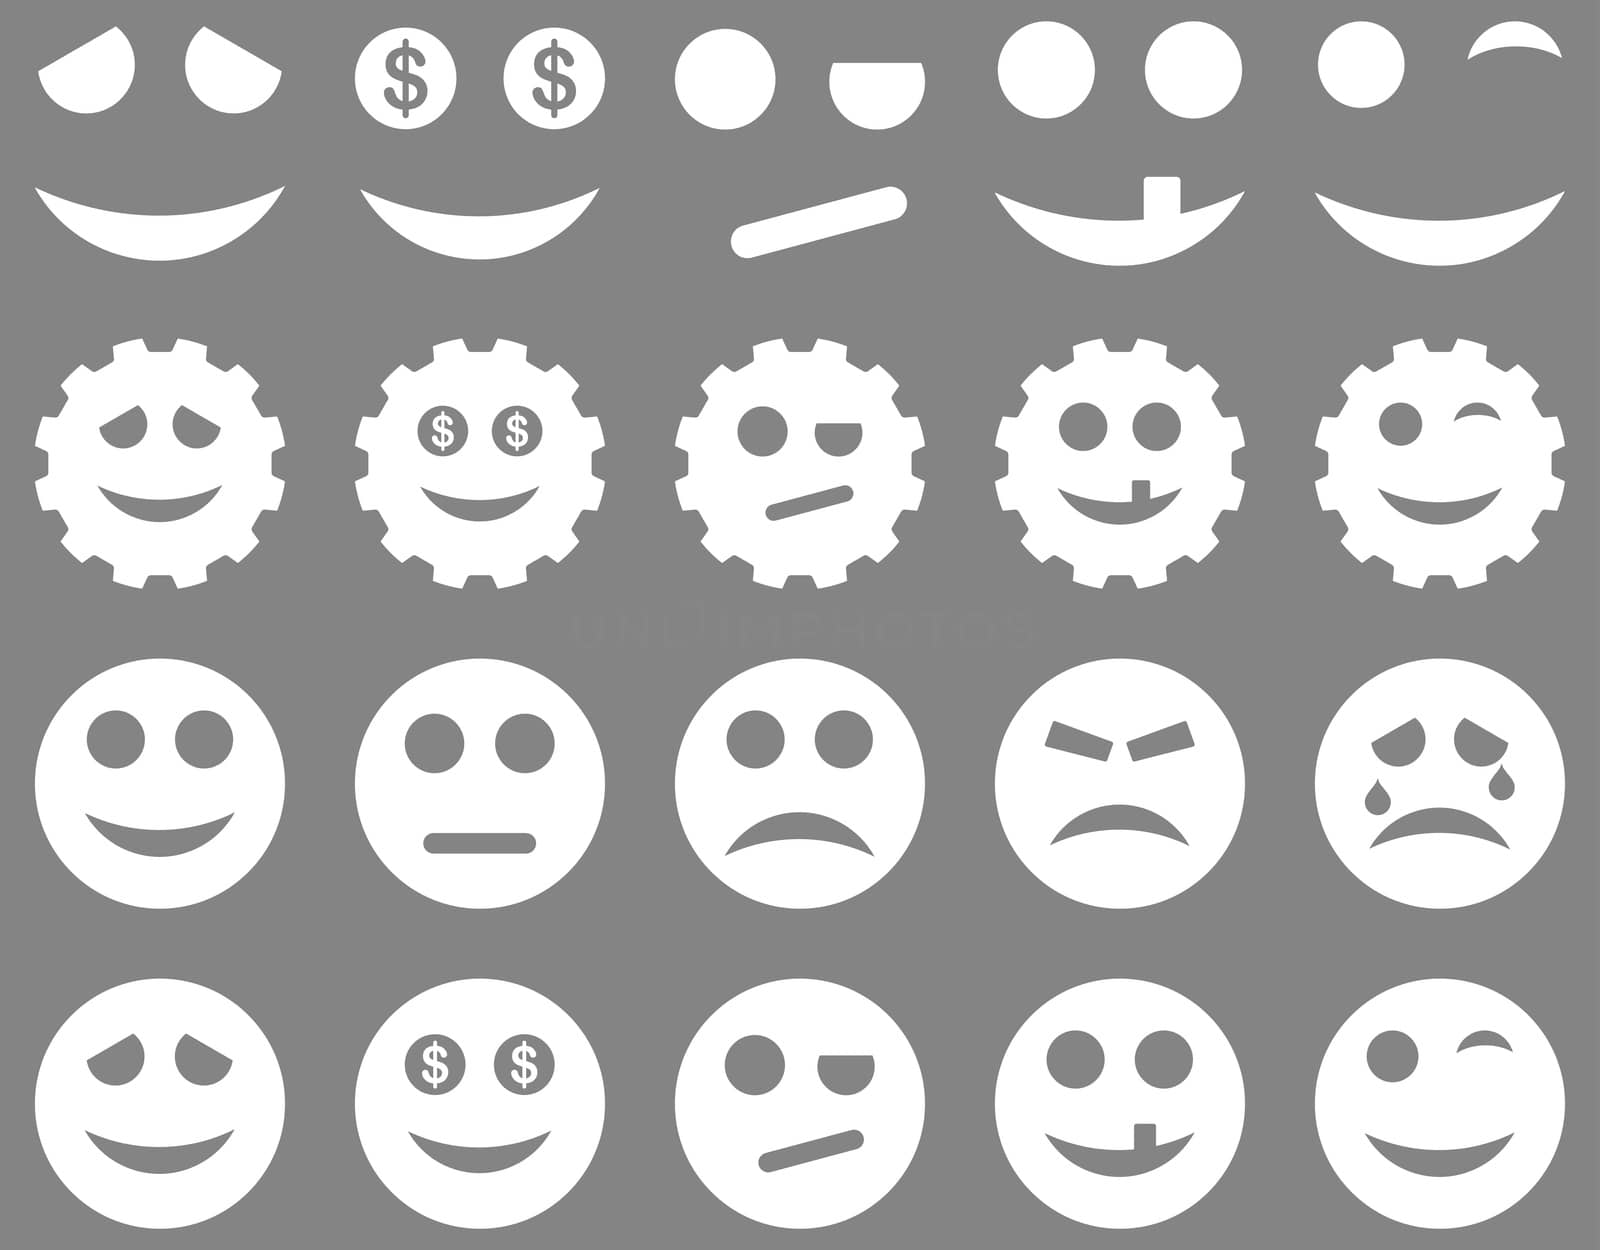 Tools, gears, smiles, emoticons icons. Glyph set style is flat images, white symbols, isolated on a gray background.